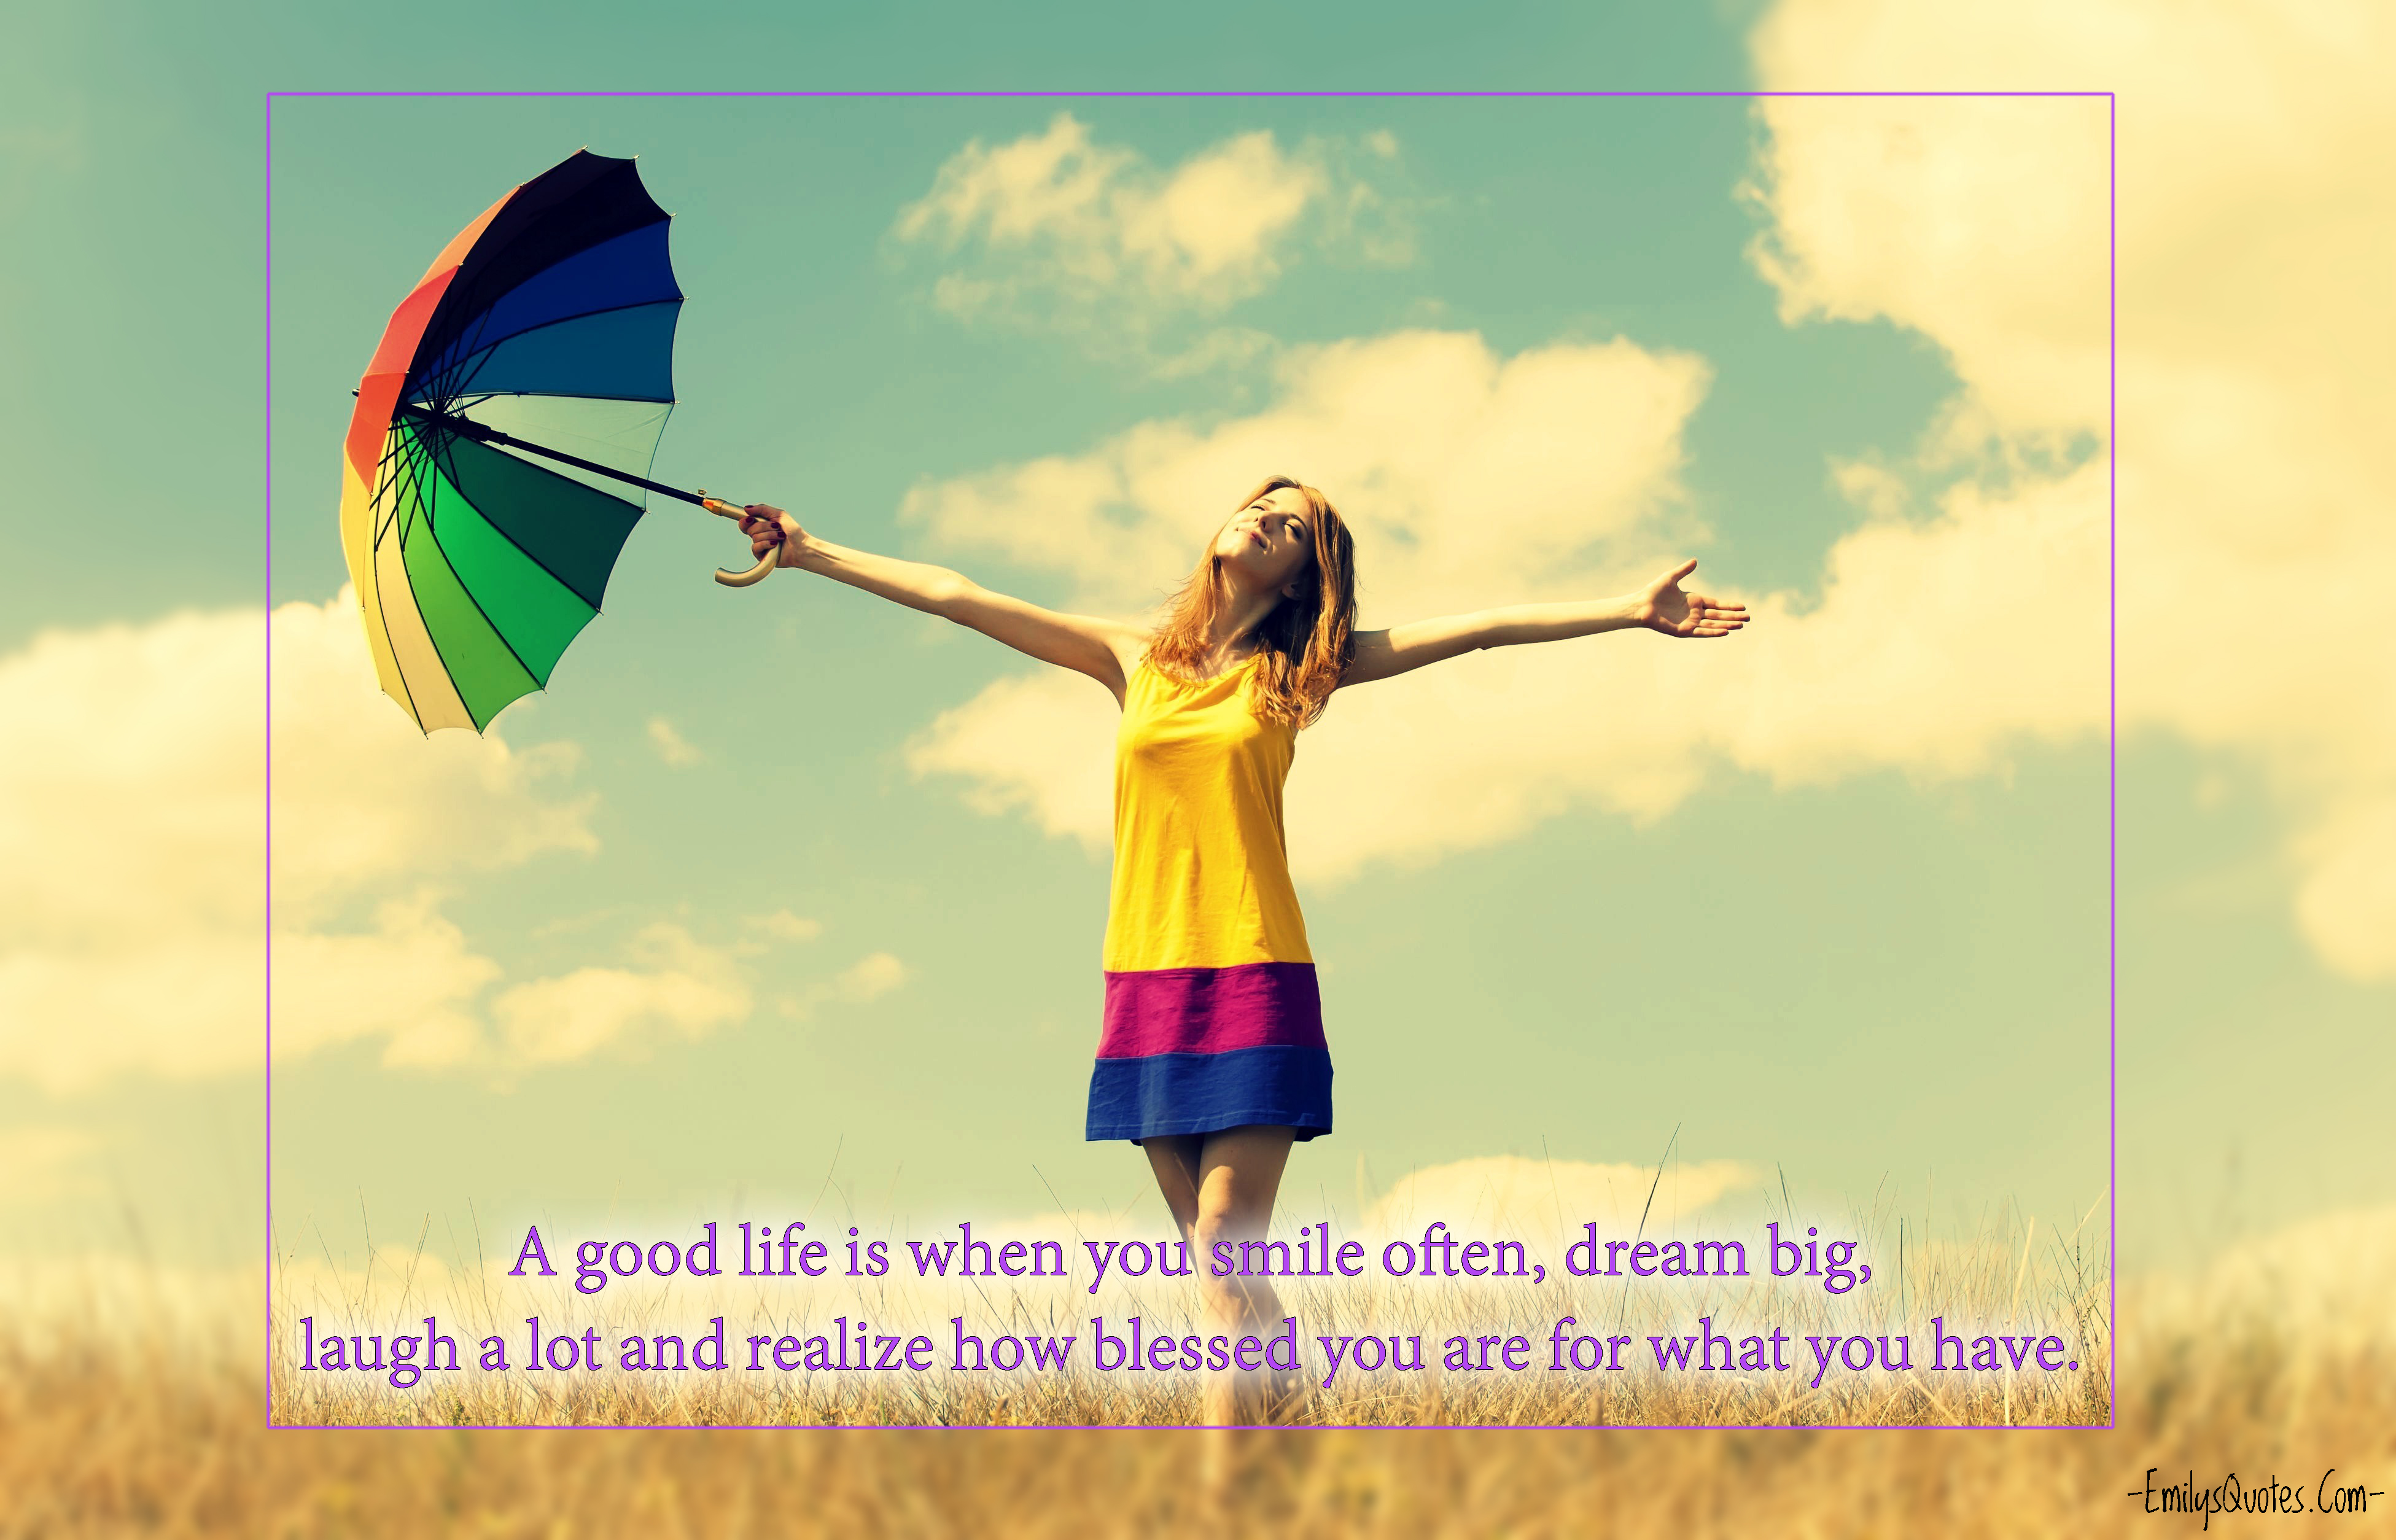 A good life is when you smile often, dream big, laugh a lot and realize